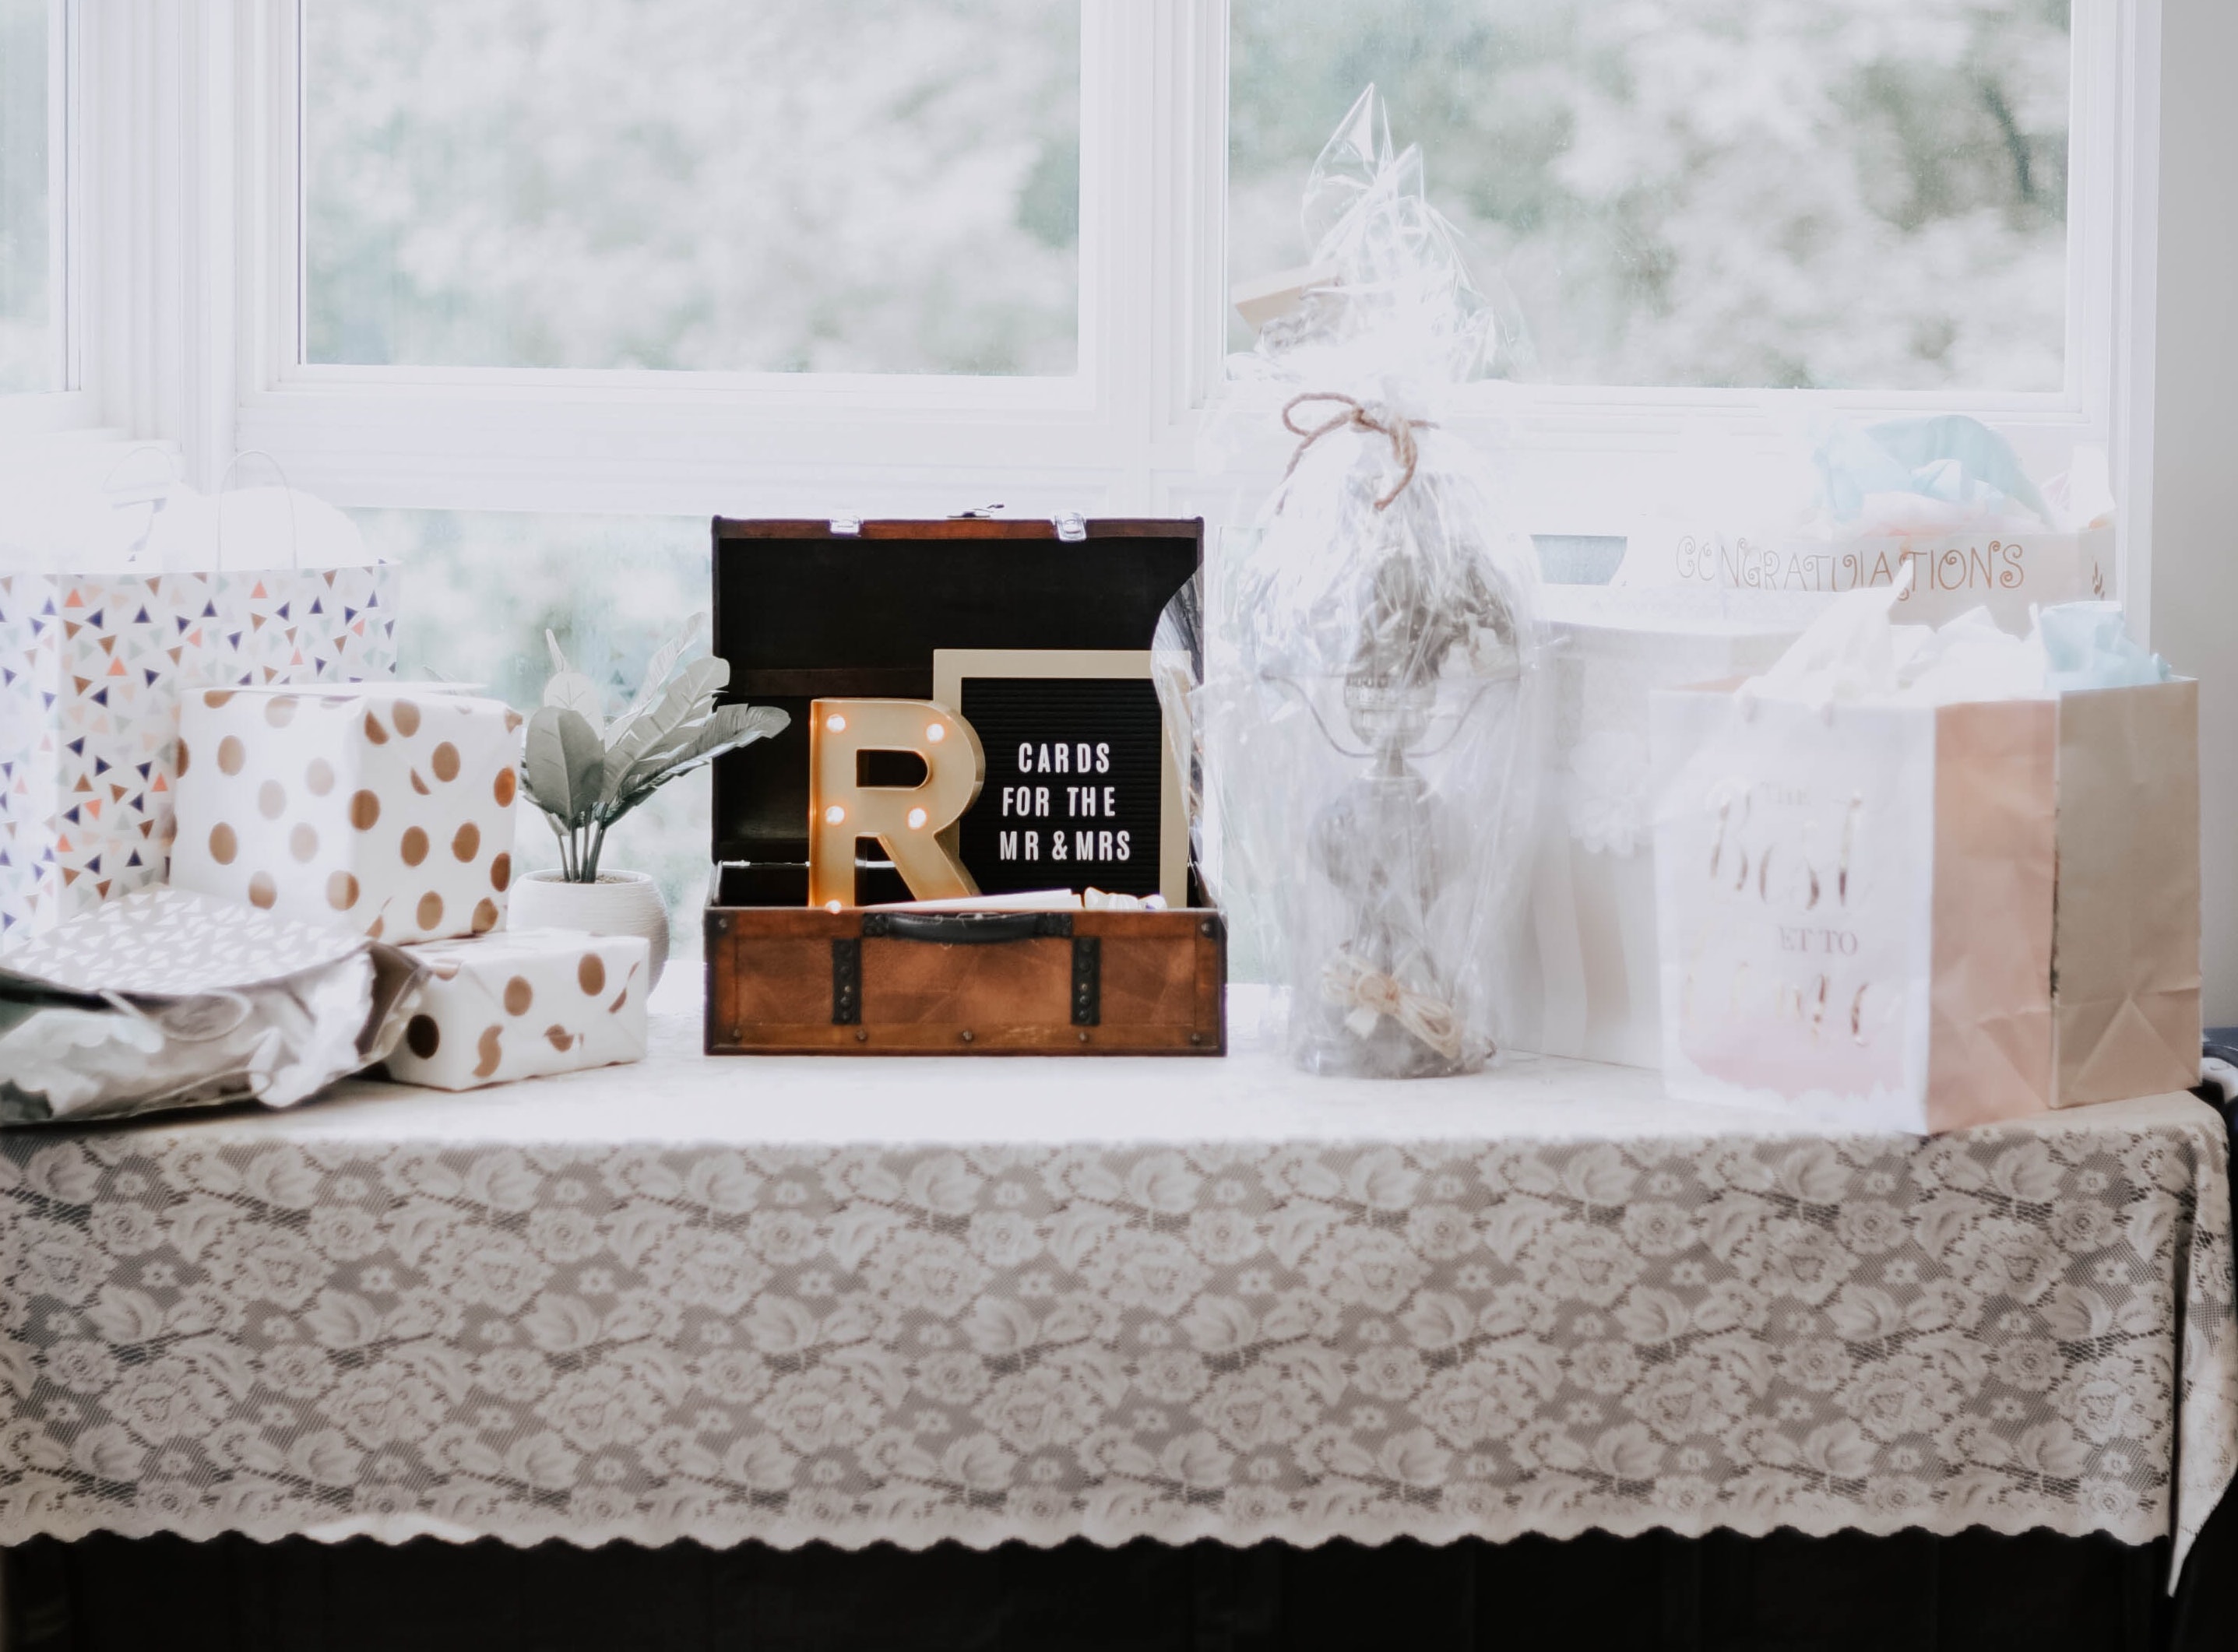 11 Unique Wedding Registry Ideas That Are Beyond Awesome